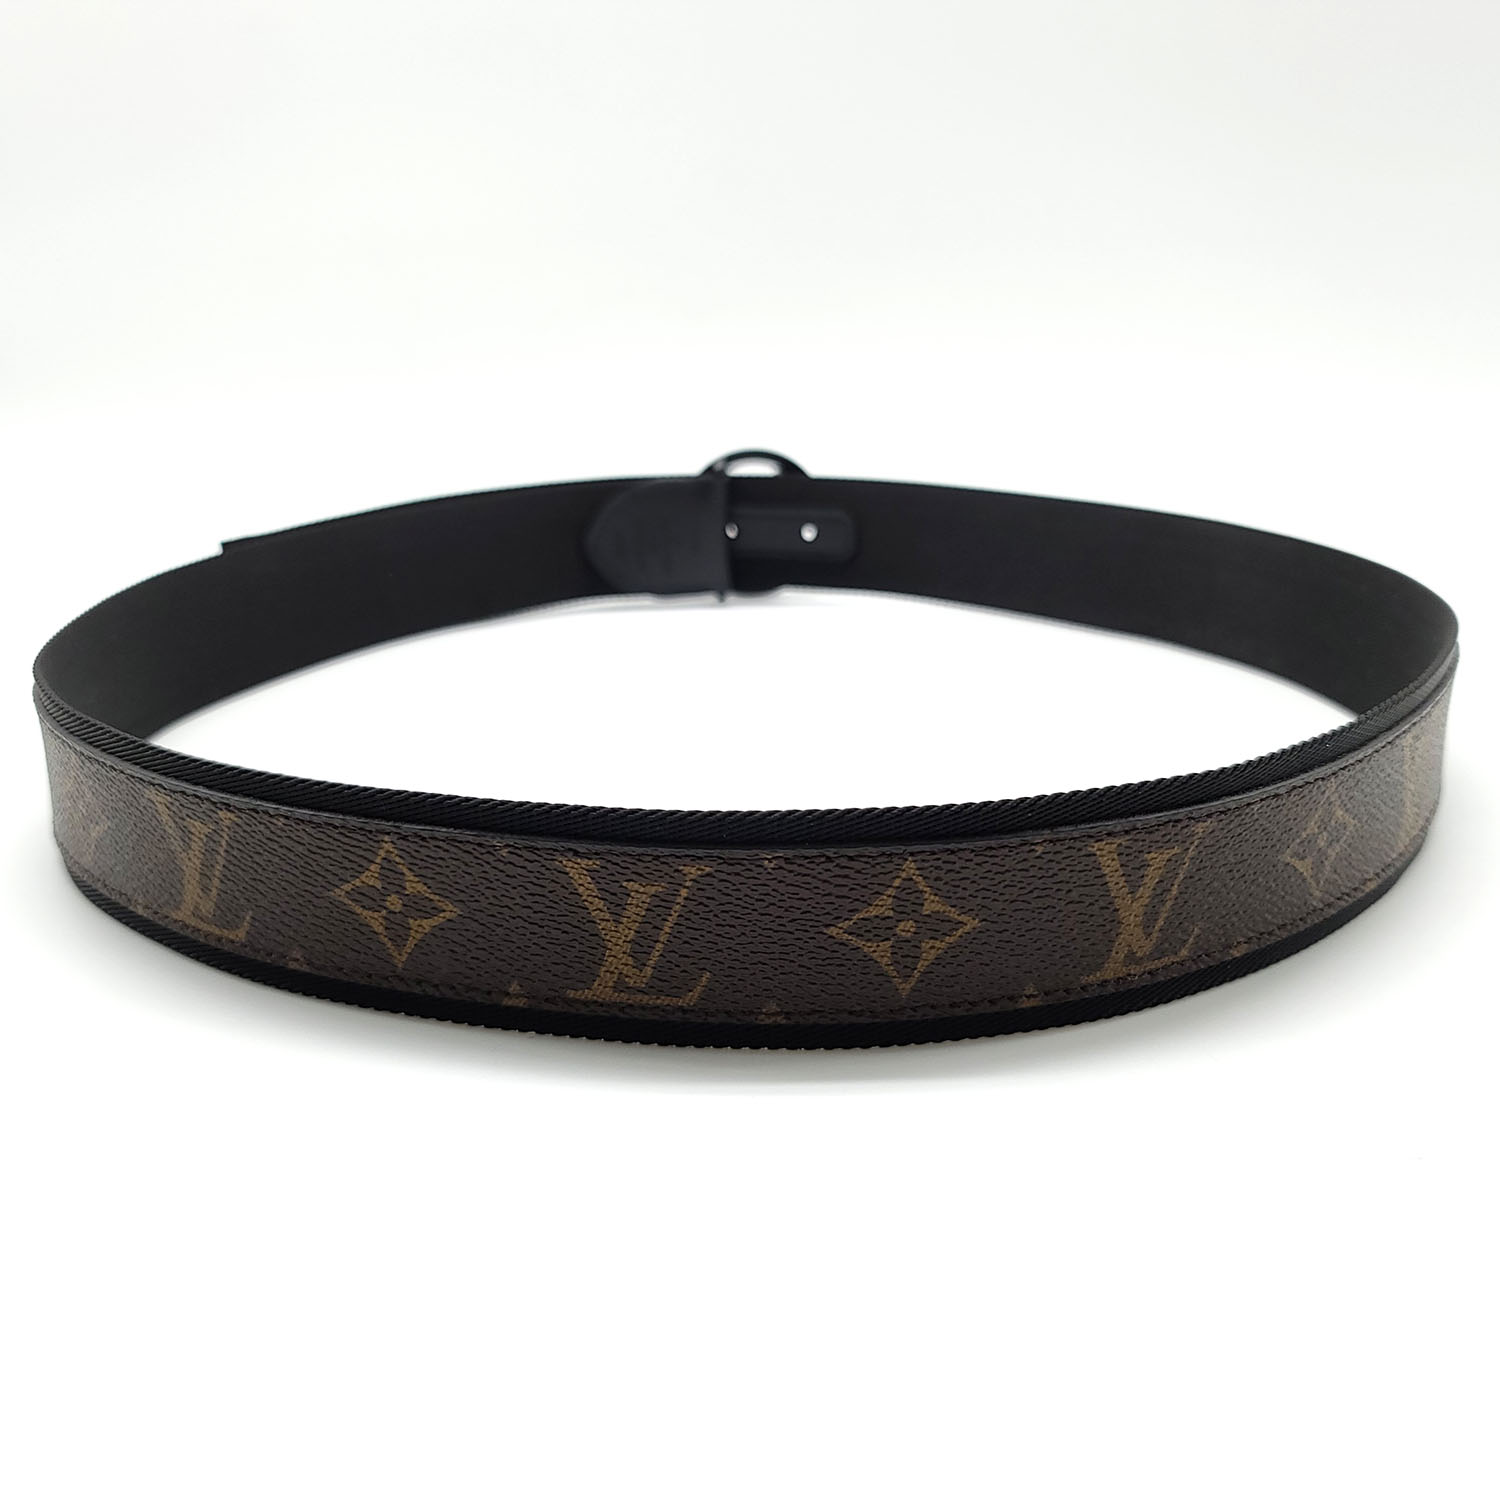 Lv circle leather belt Louis Vuitton Black size 75 cm in Leather - 33212092